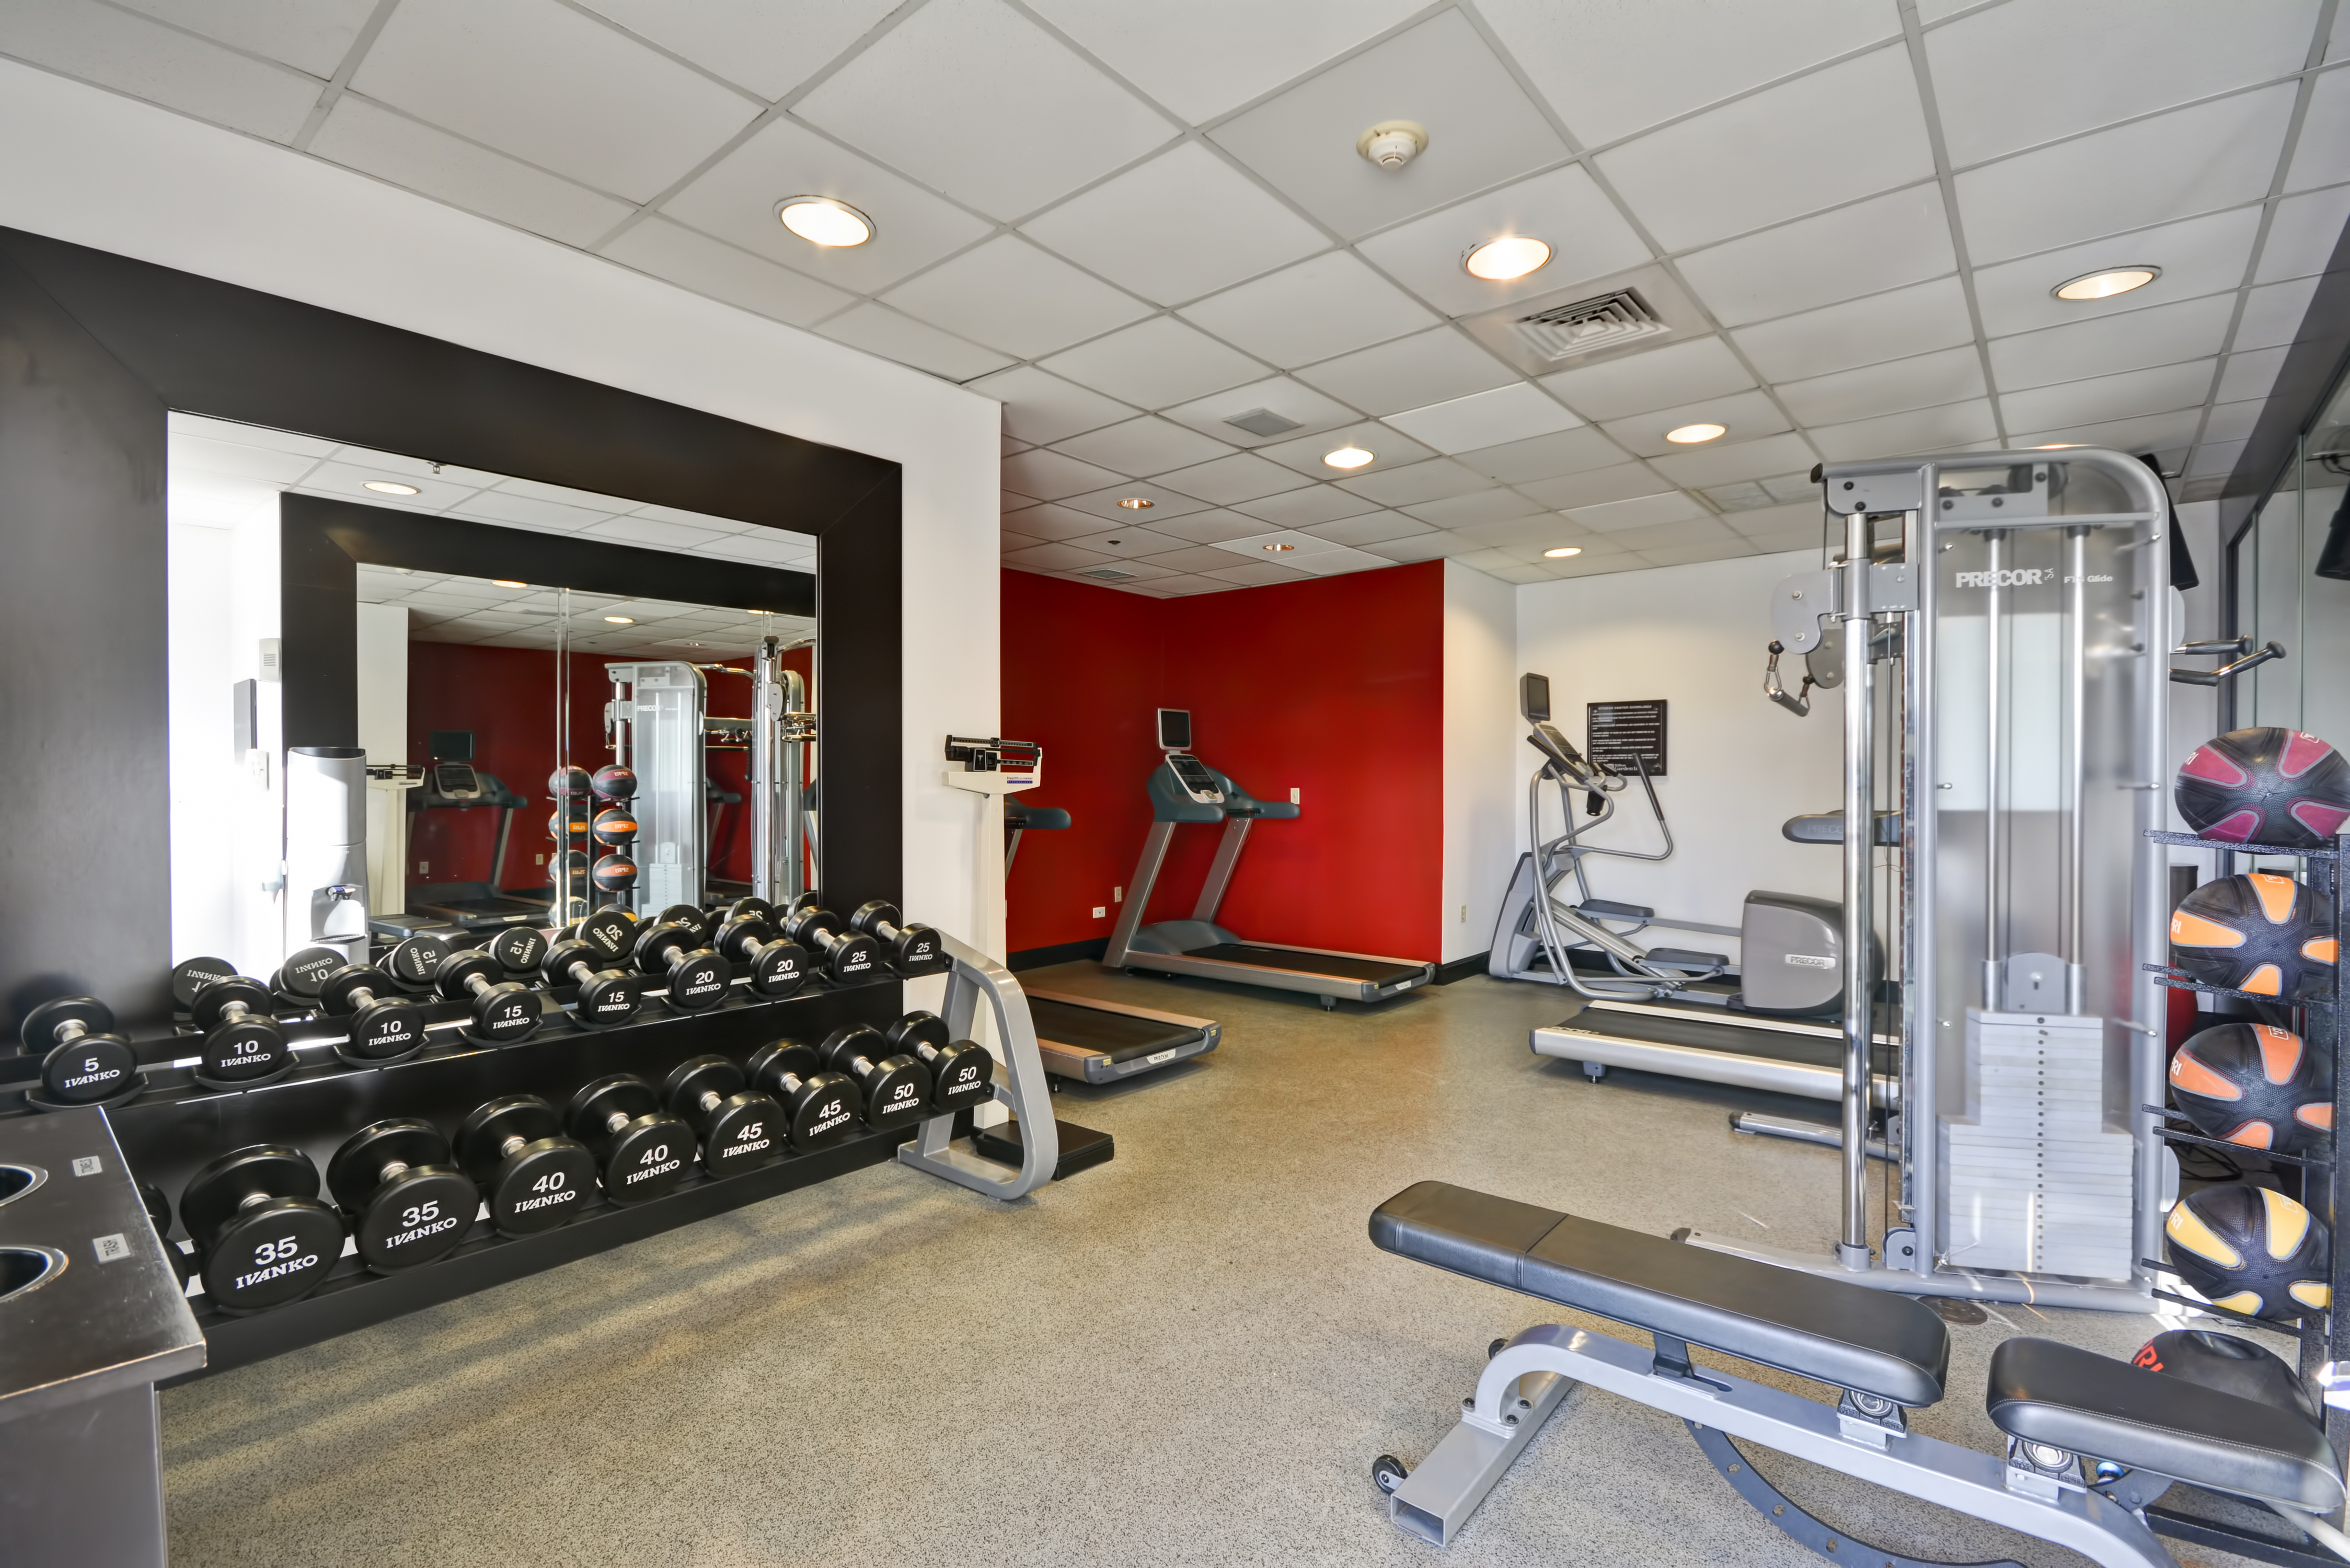 Fitness Center With Weight Machine, Weight Balls, Bench, Free Weights, Large Mirror, Scale, and Cardio Equipment